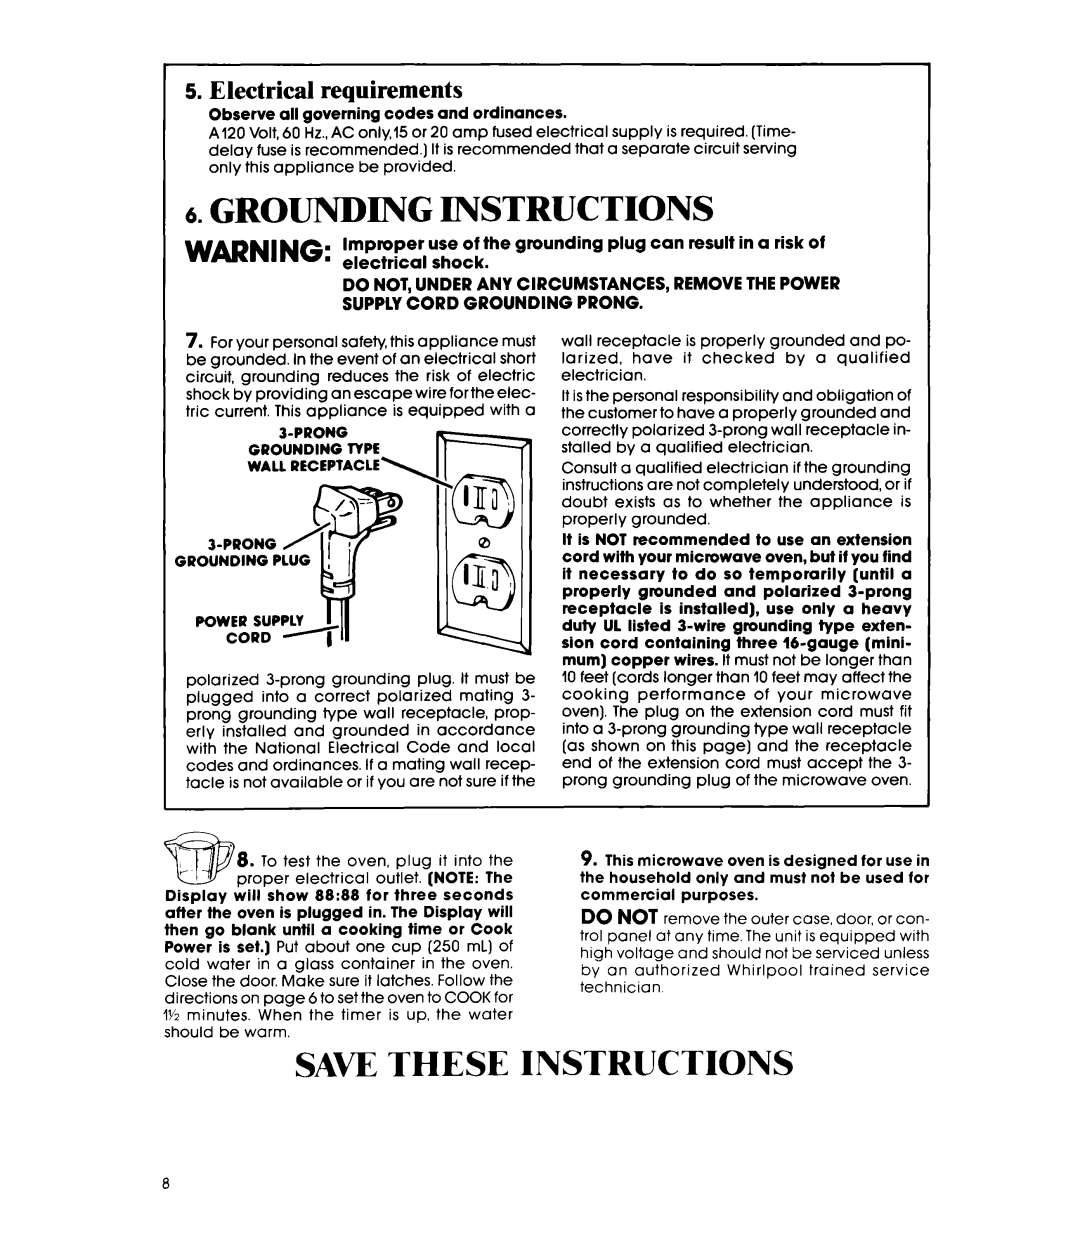 Whirlpool MW8500XS manual Grounding Instructions, Save These Instructions, Electrical requirements 